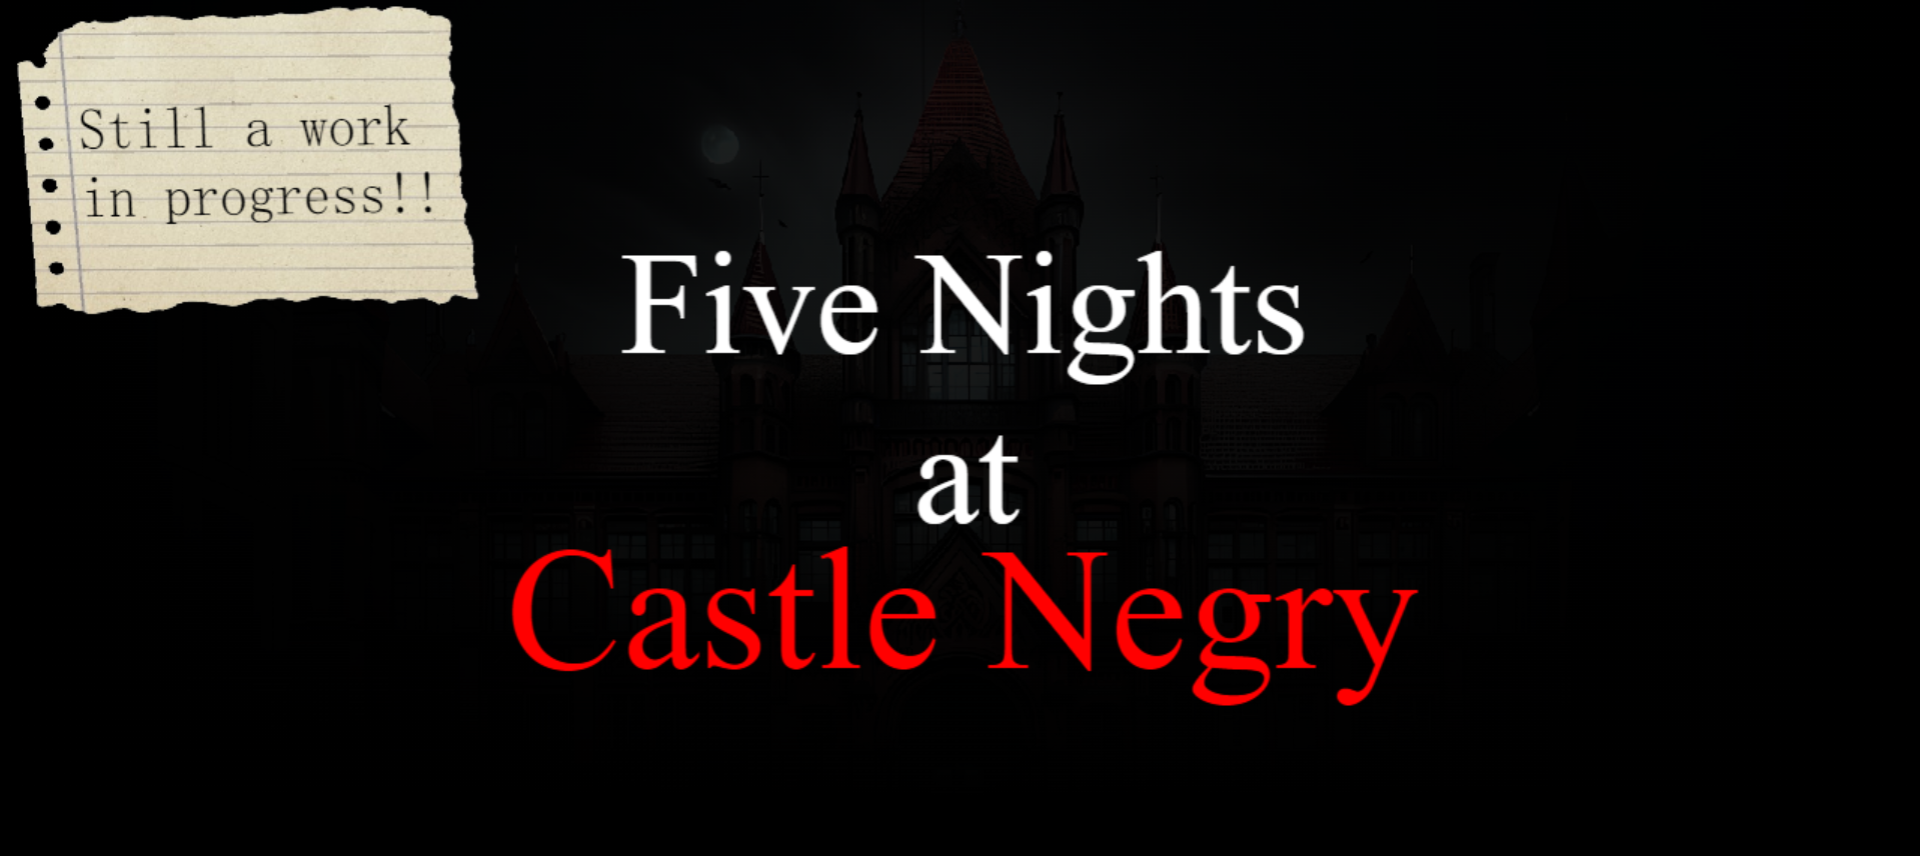 Five Nights at Castle Negry